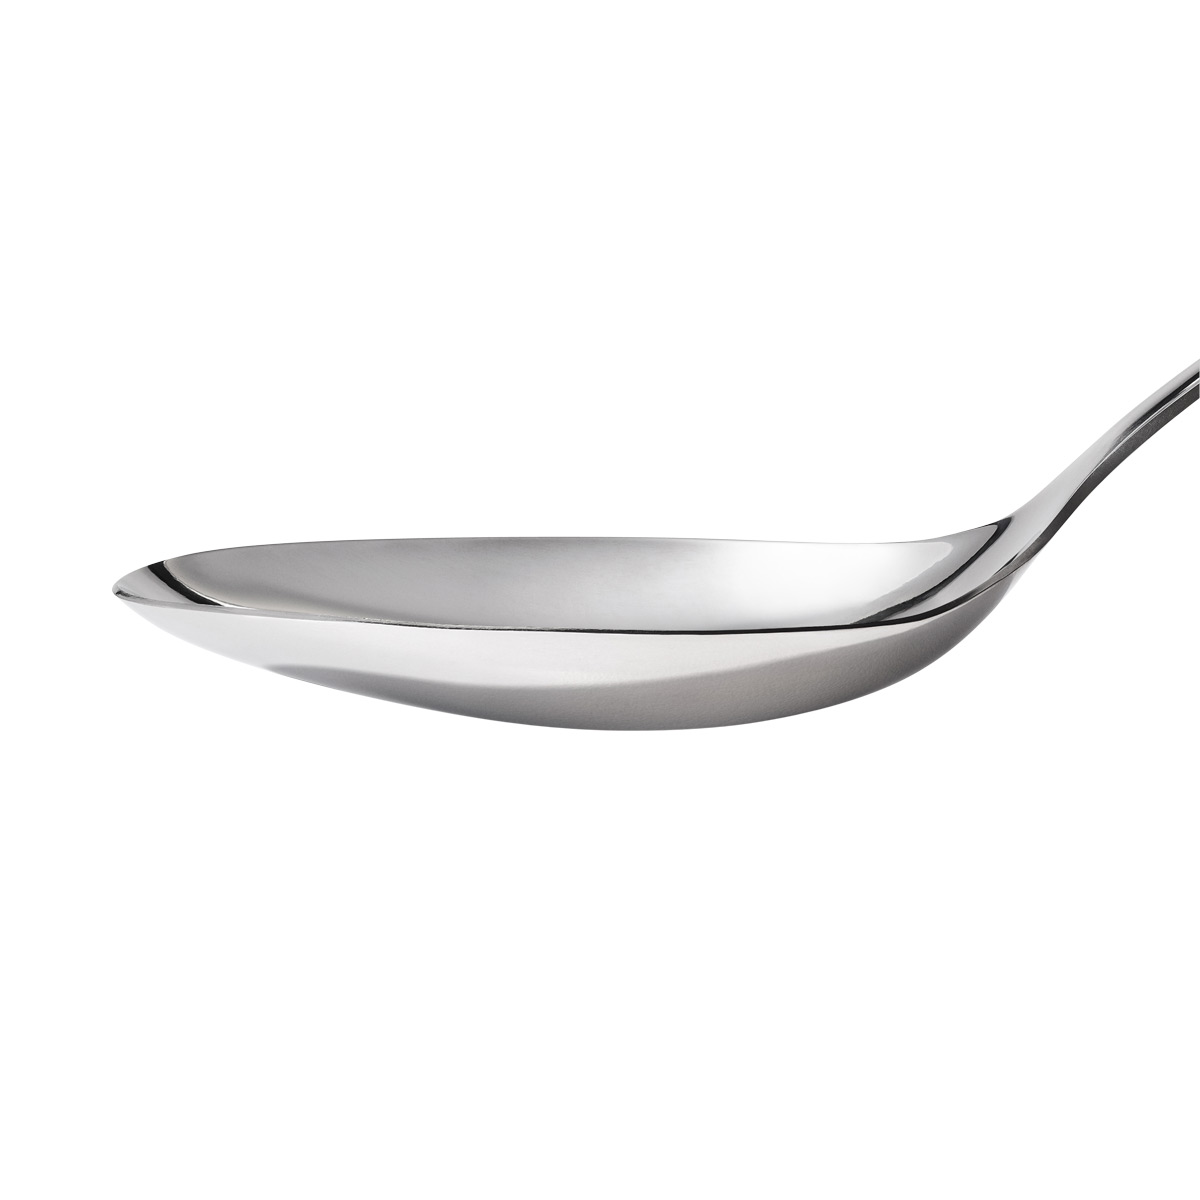 https://www.containerstore.com/catalogimages/453945/10089985_OXO-STL-Cooking-Spoon_VEN5.jpg